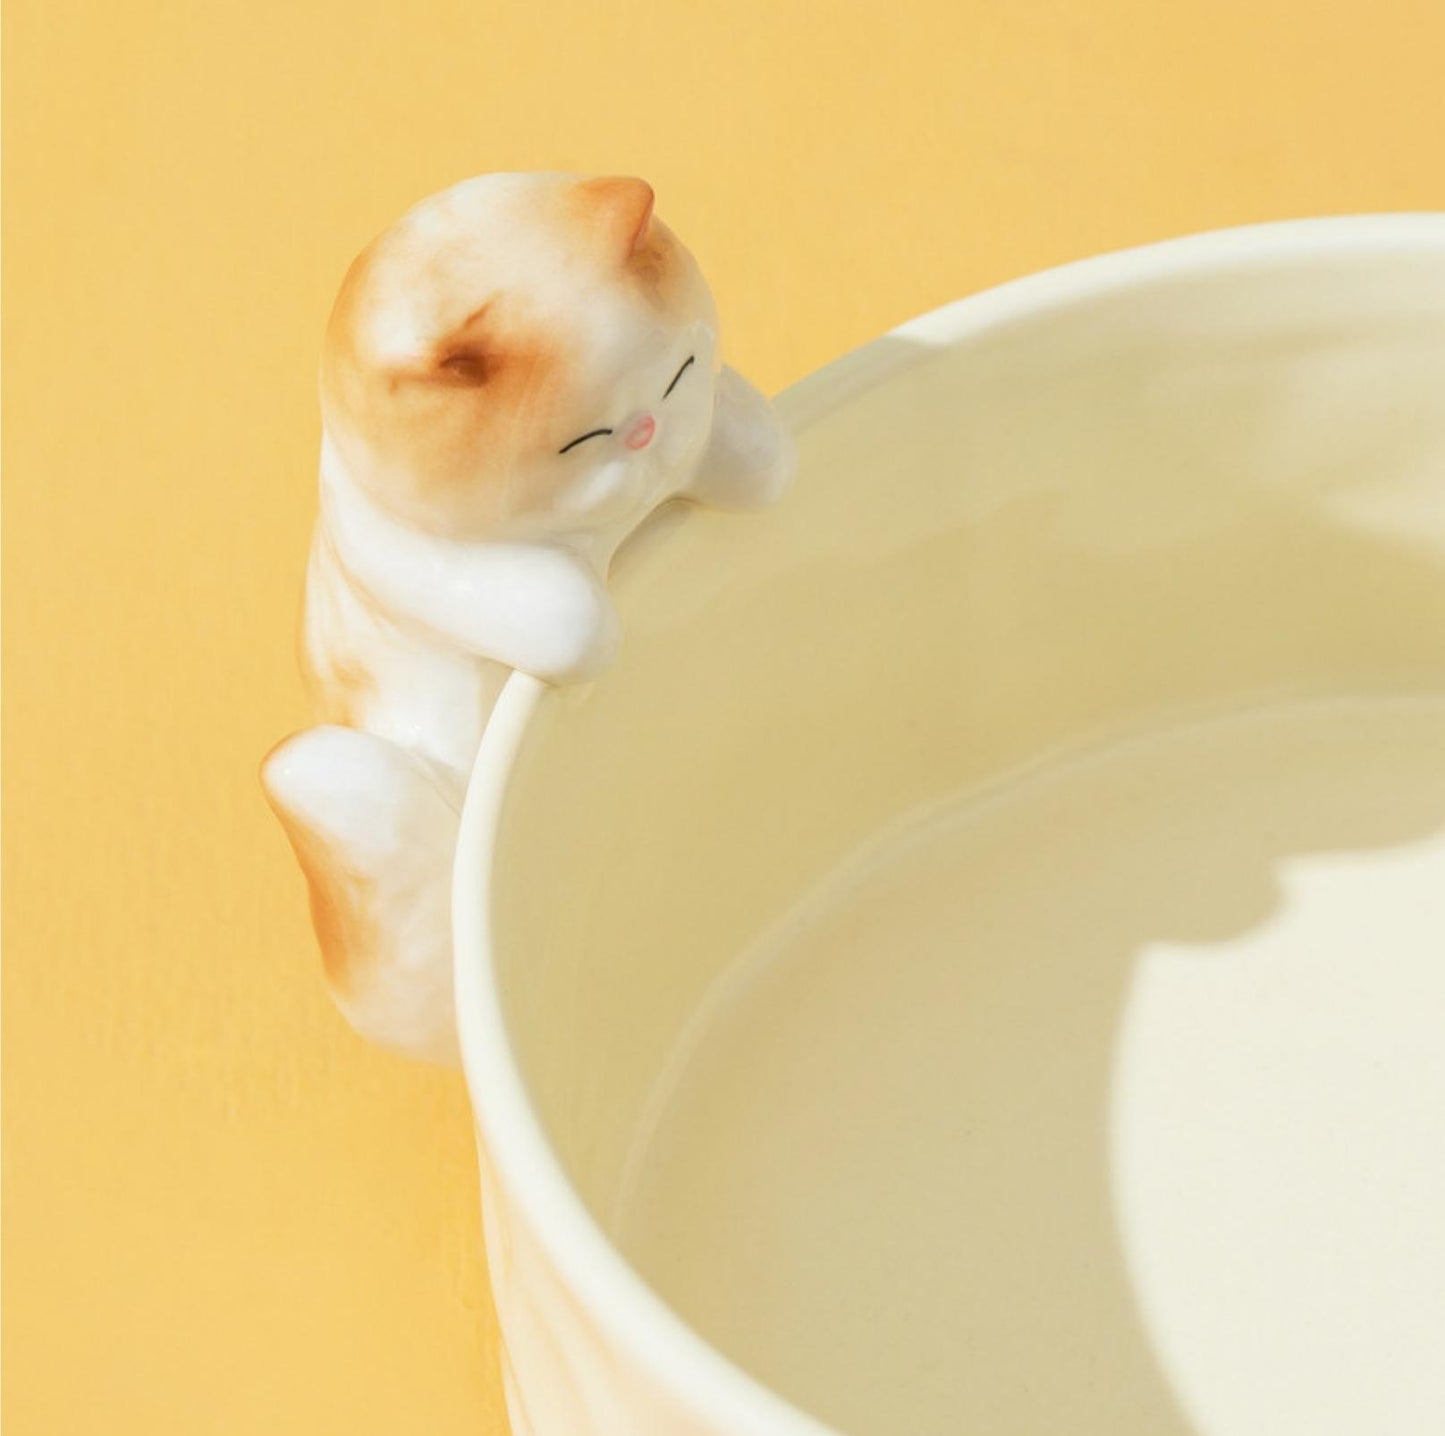 Nordic-style 3D Sculpture Ceramic Cat and Small Dog Bowl